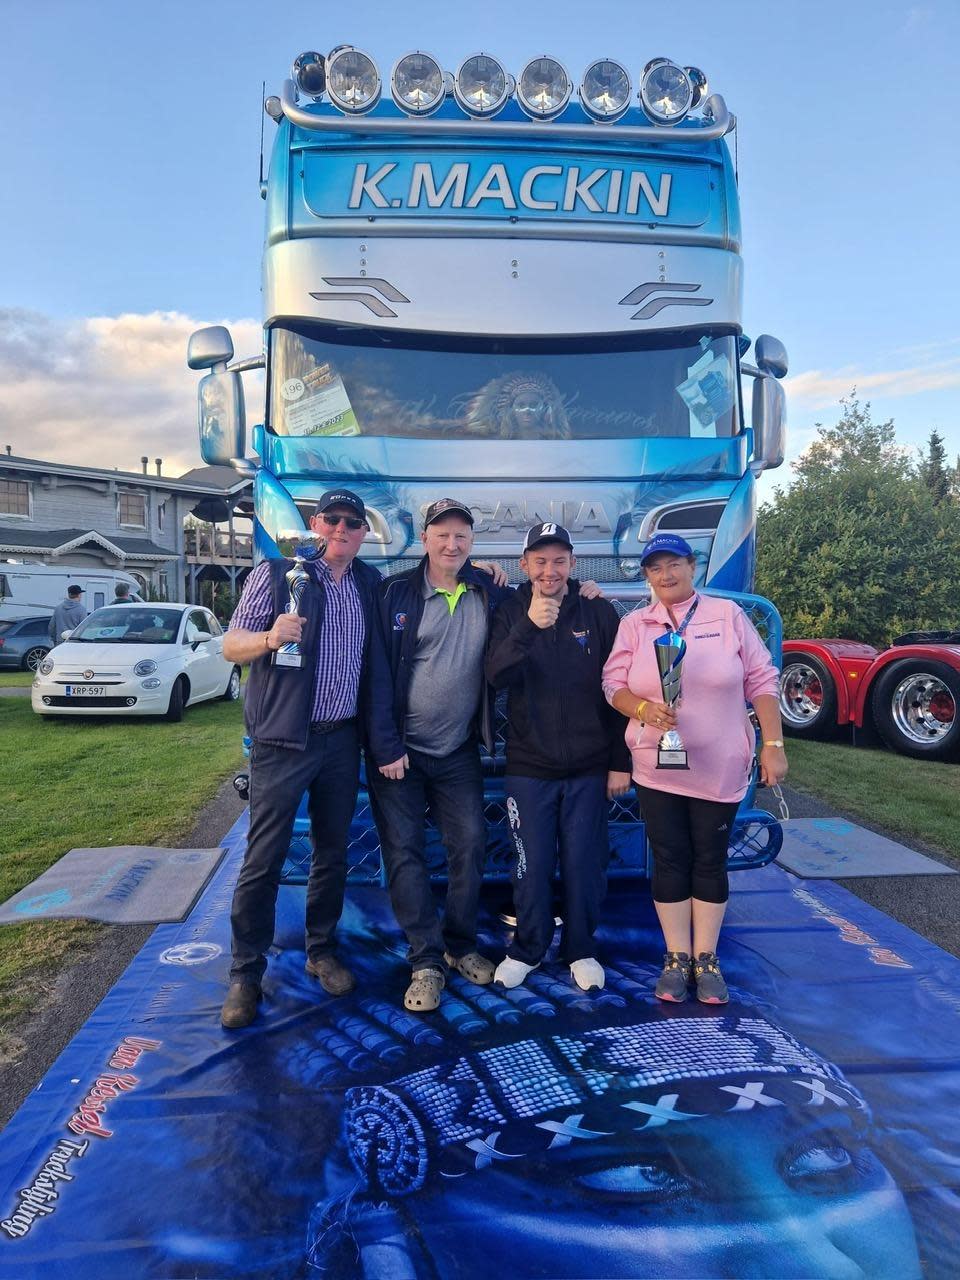 From left: Kevin, Dessie, Tiernan & Carol Mackin, whose 620 Scania Longline truck won 'Best Truck in Show' at the Power Truck Show in Finland.